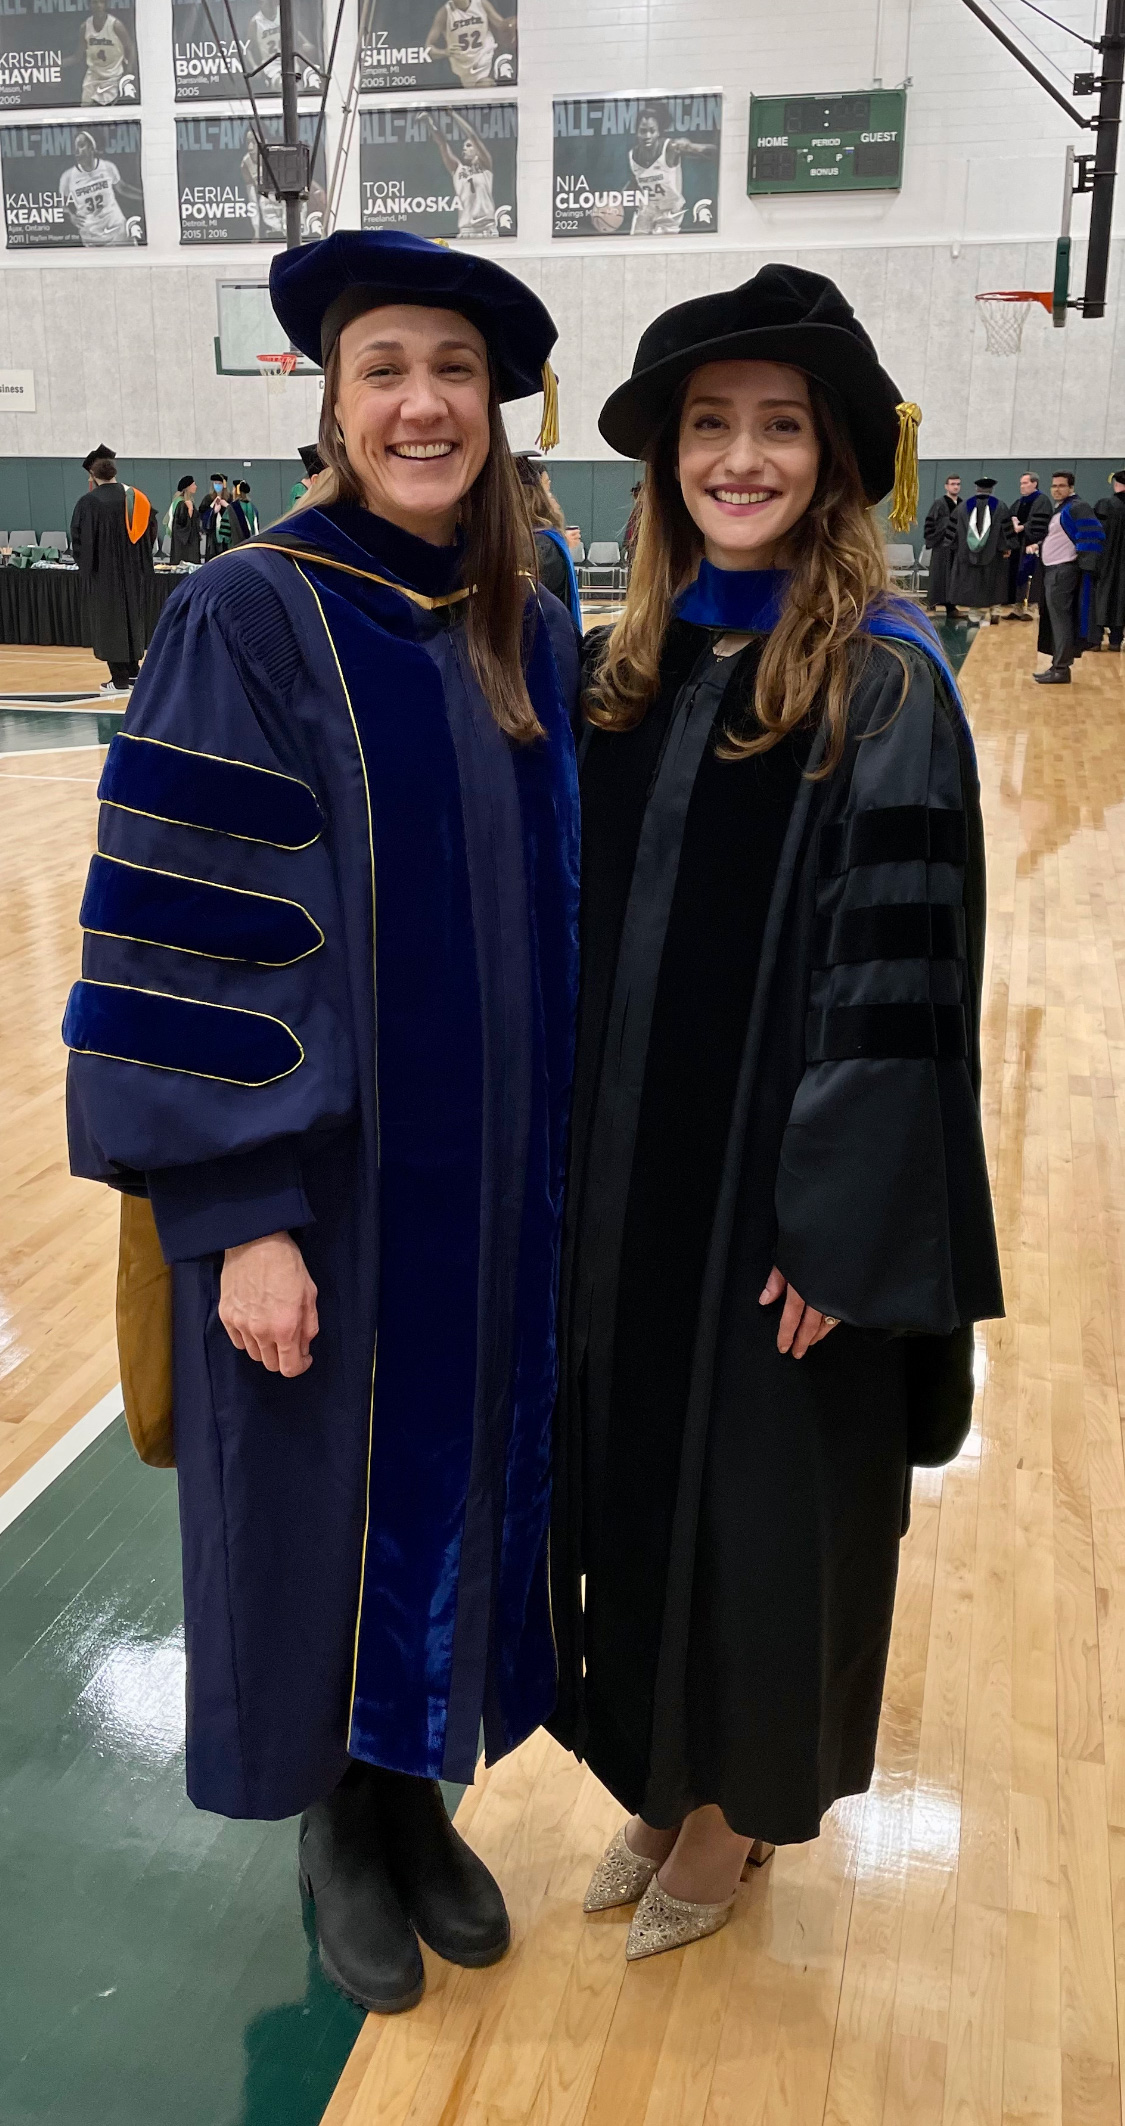 Yasi Zamani-Hank (right) and her advisor, Claire Margerison, at the MSU fall graduation ceremony on Dec. 16. Photograph by Hanyue Li. 